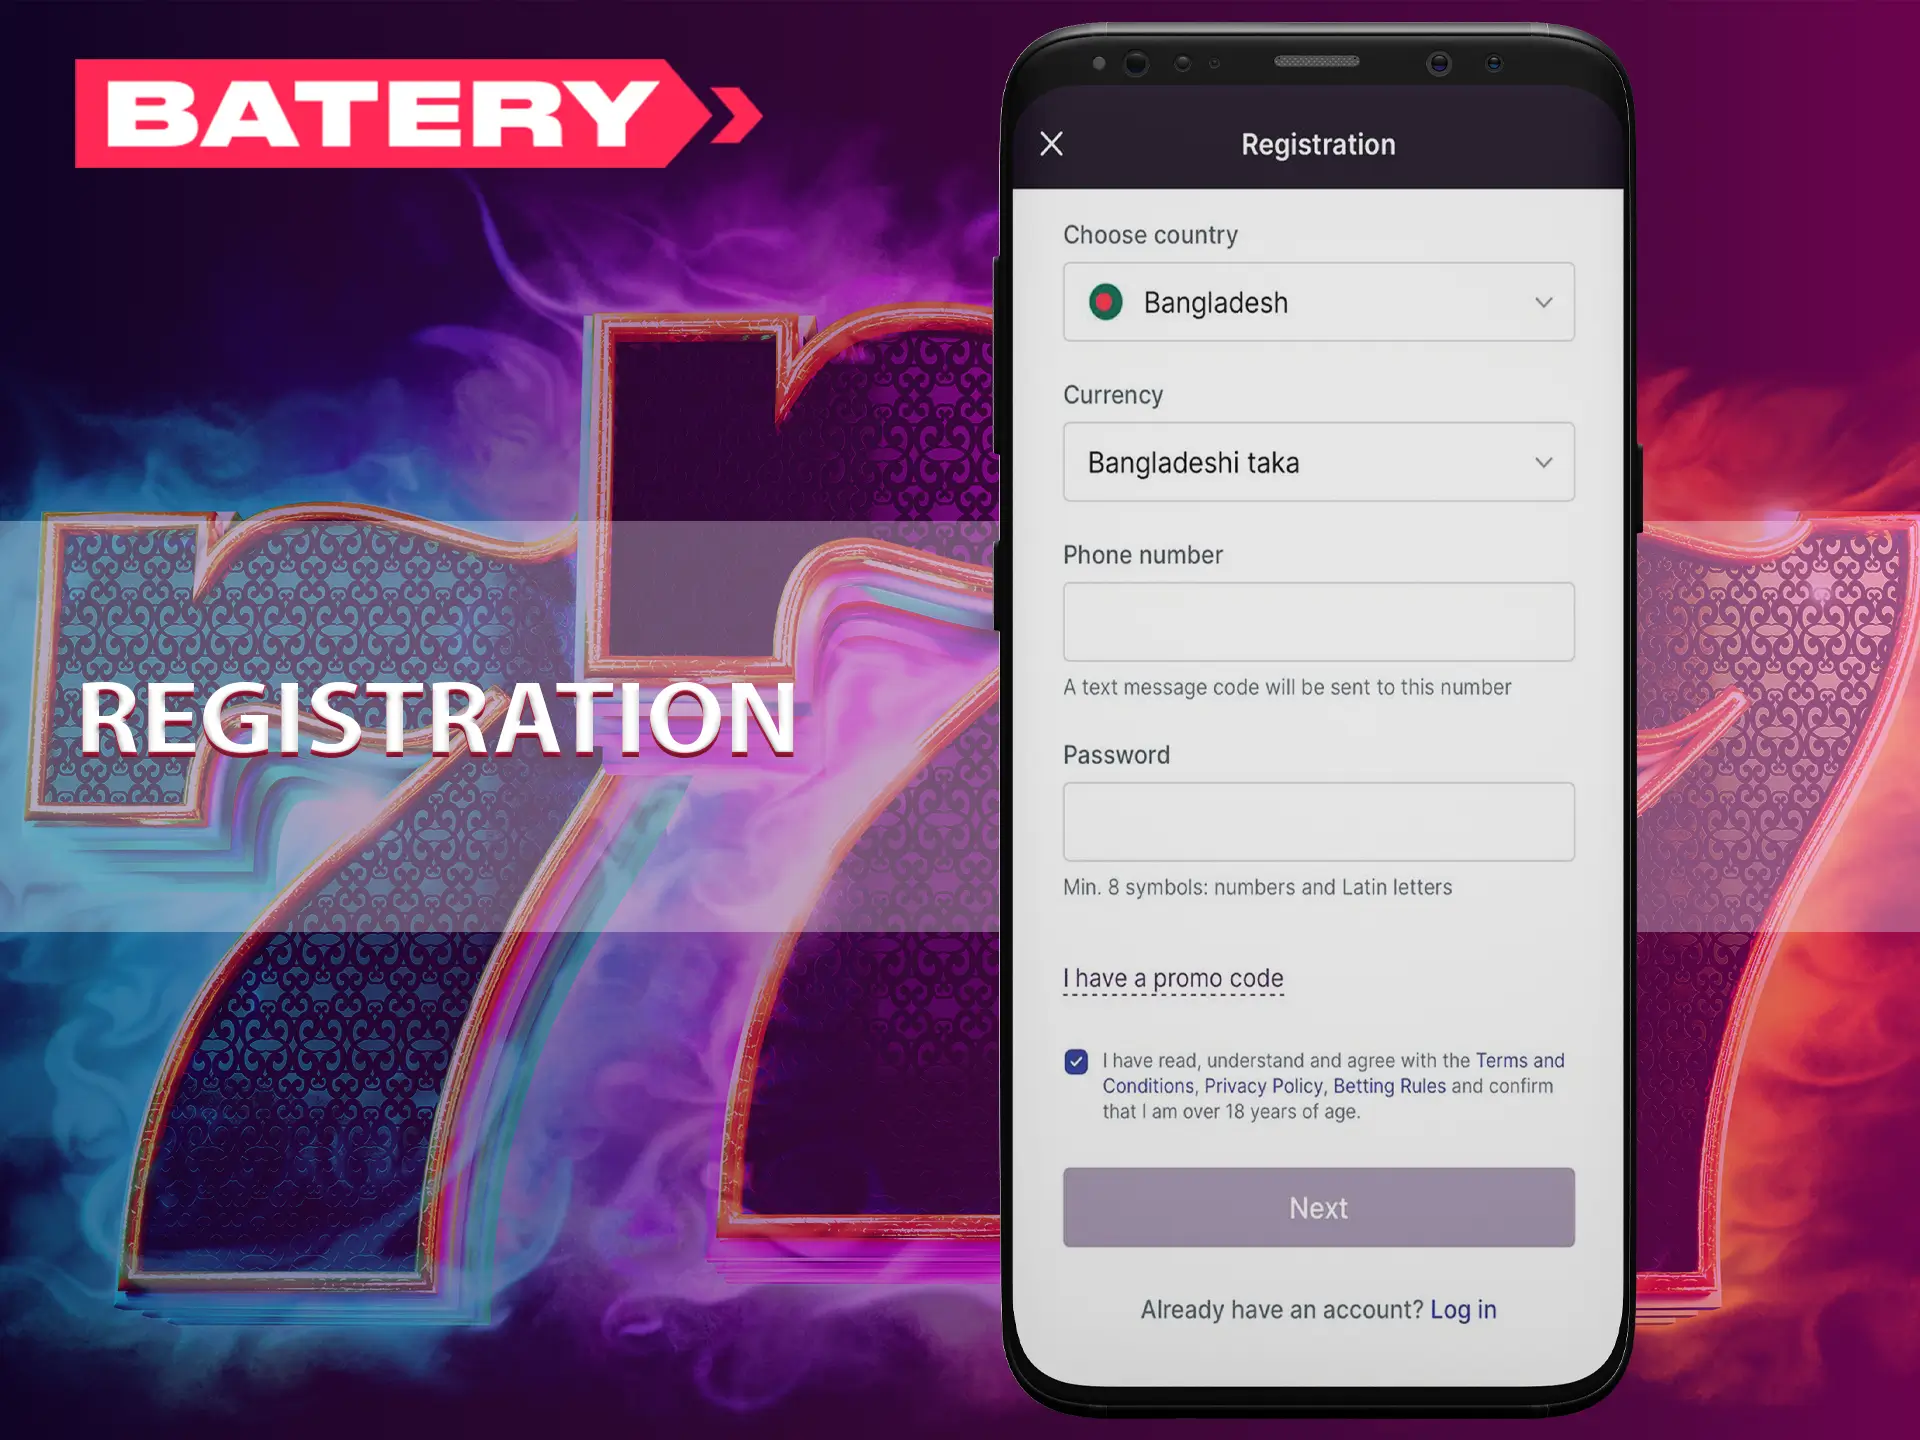 Registering with Batery will be easy to understand even for a beginner.